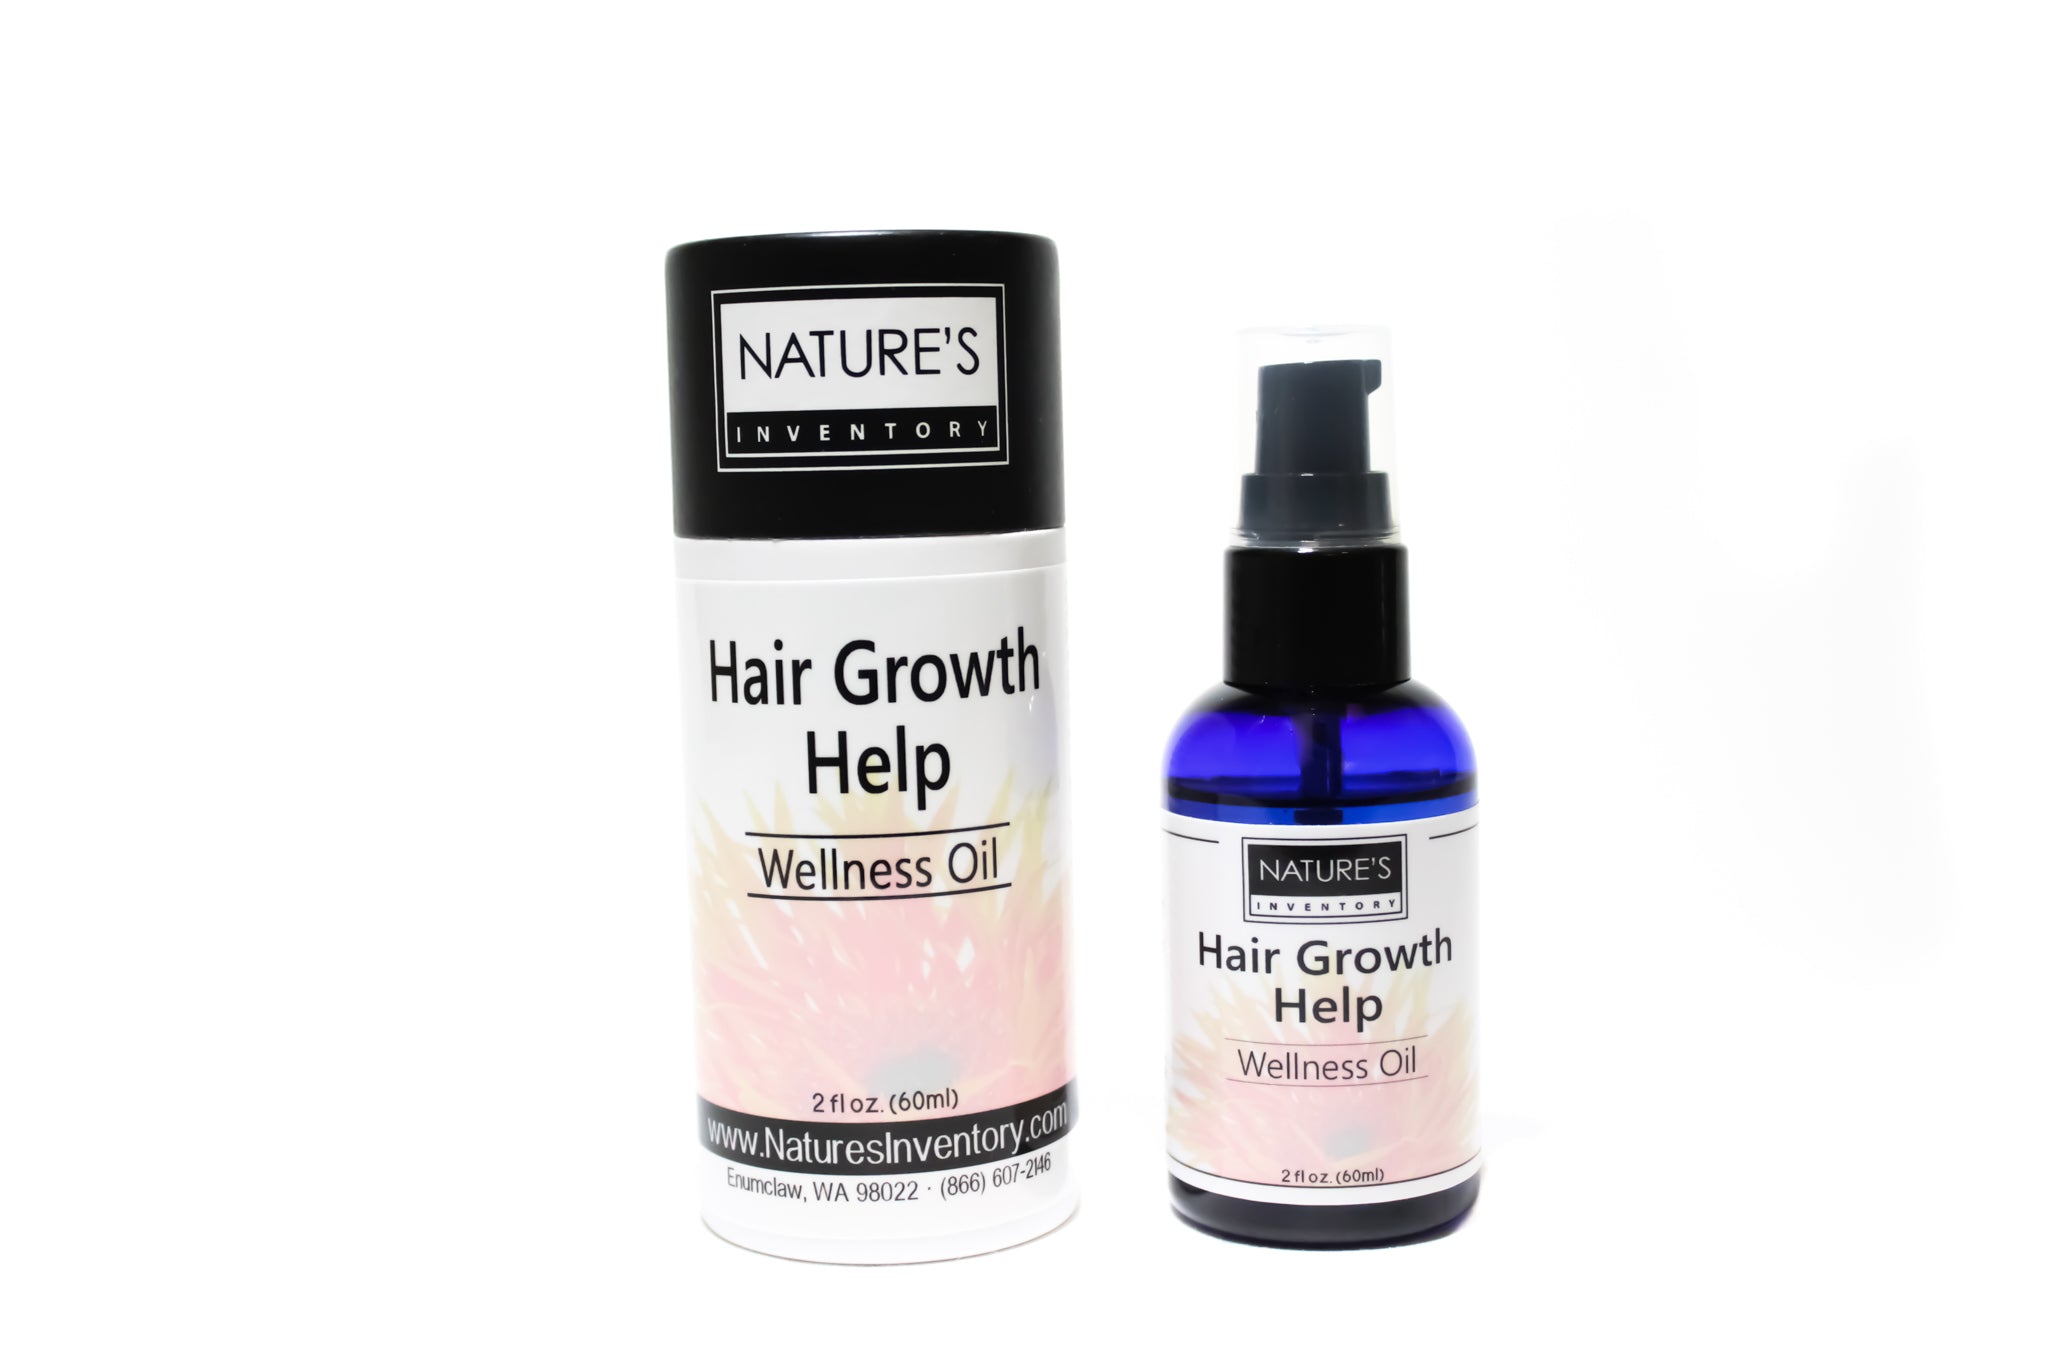 Hair Growth Help Wellness Oil Natures Inventory